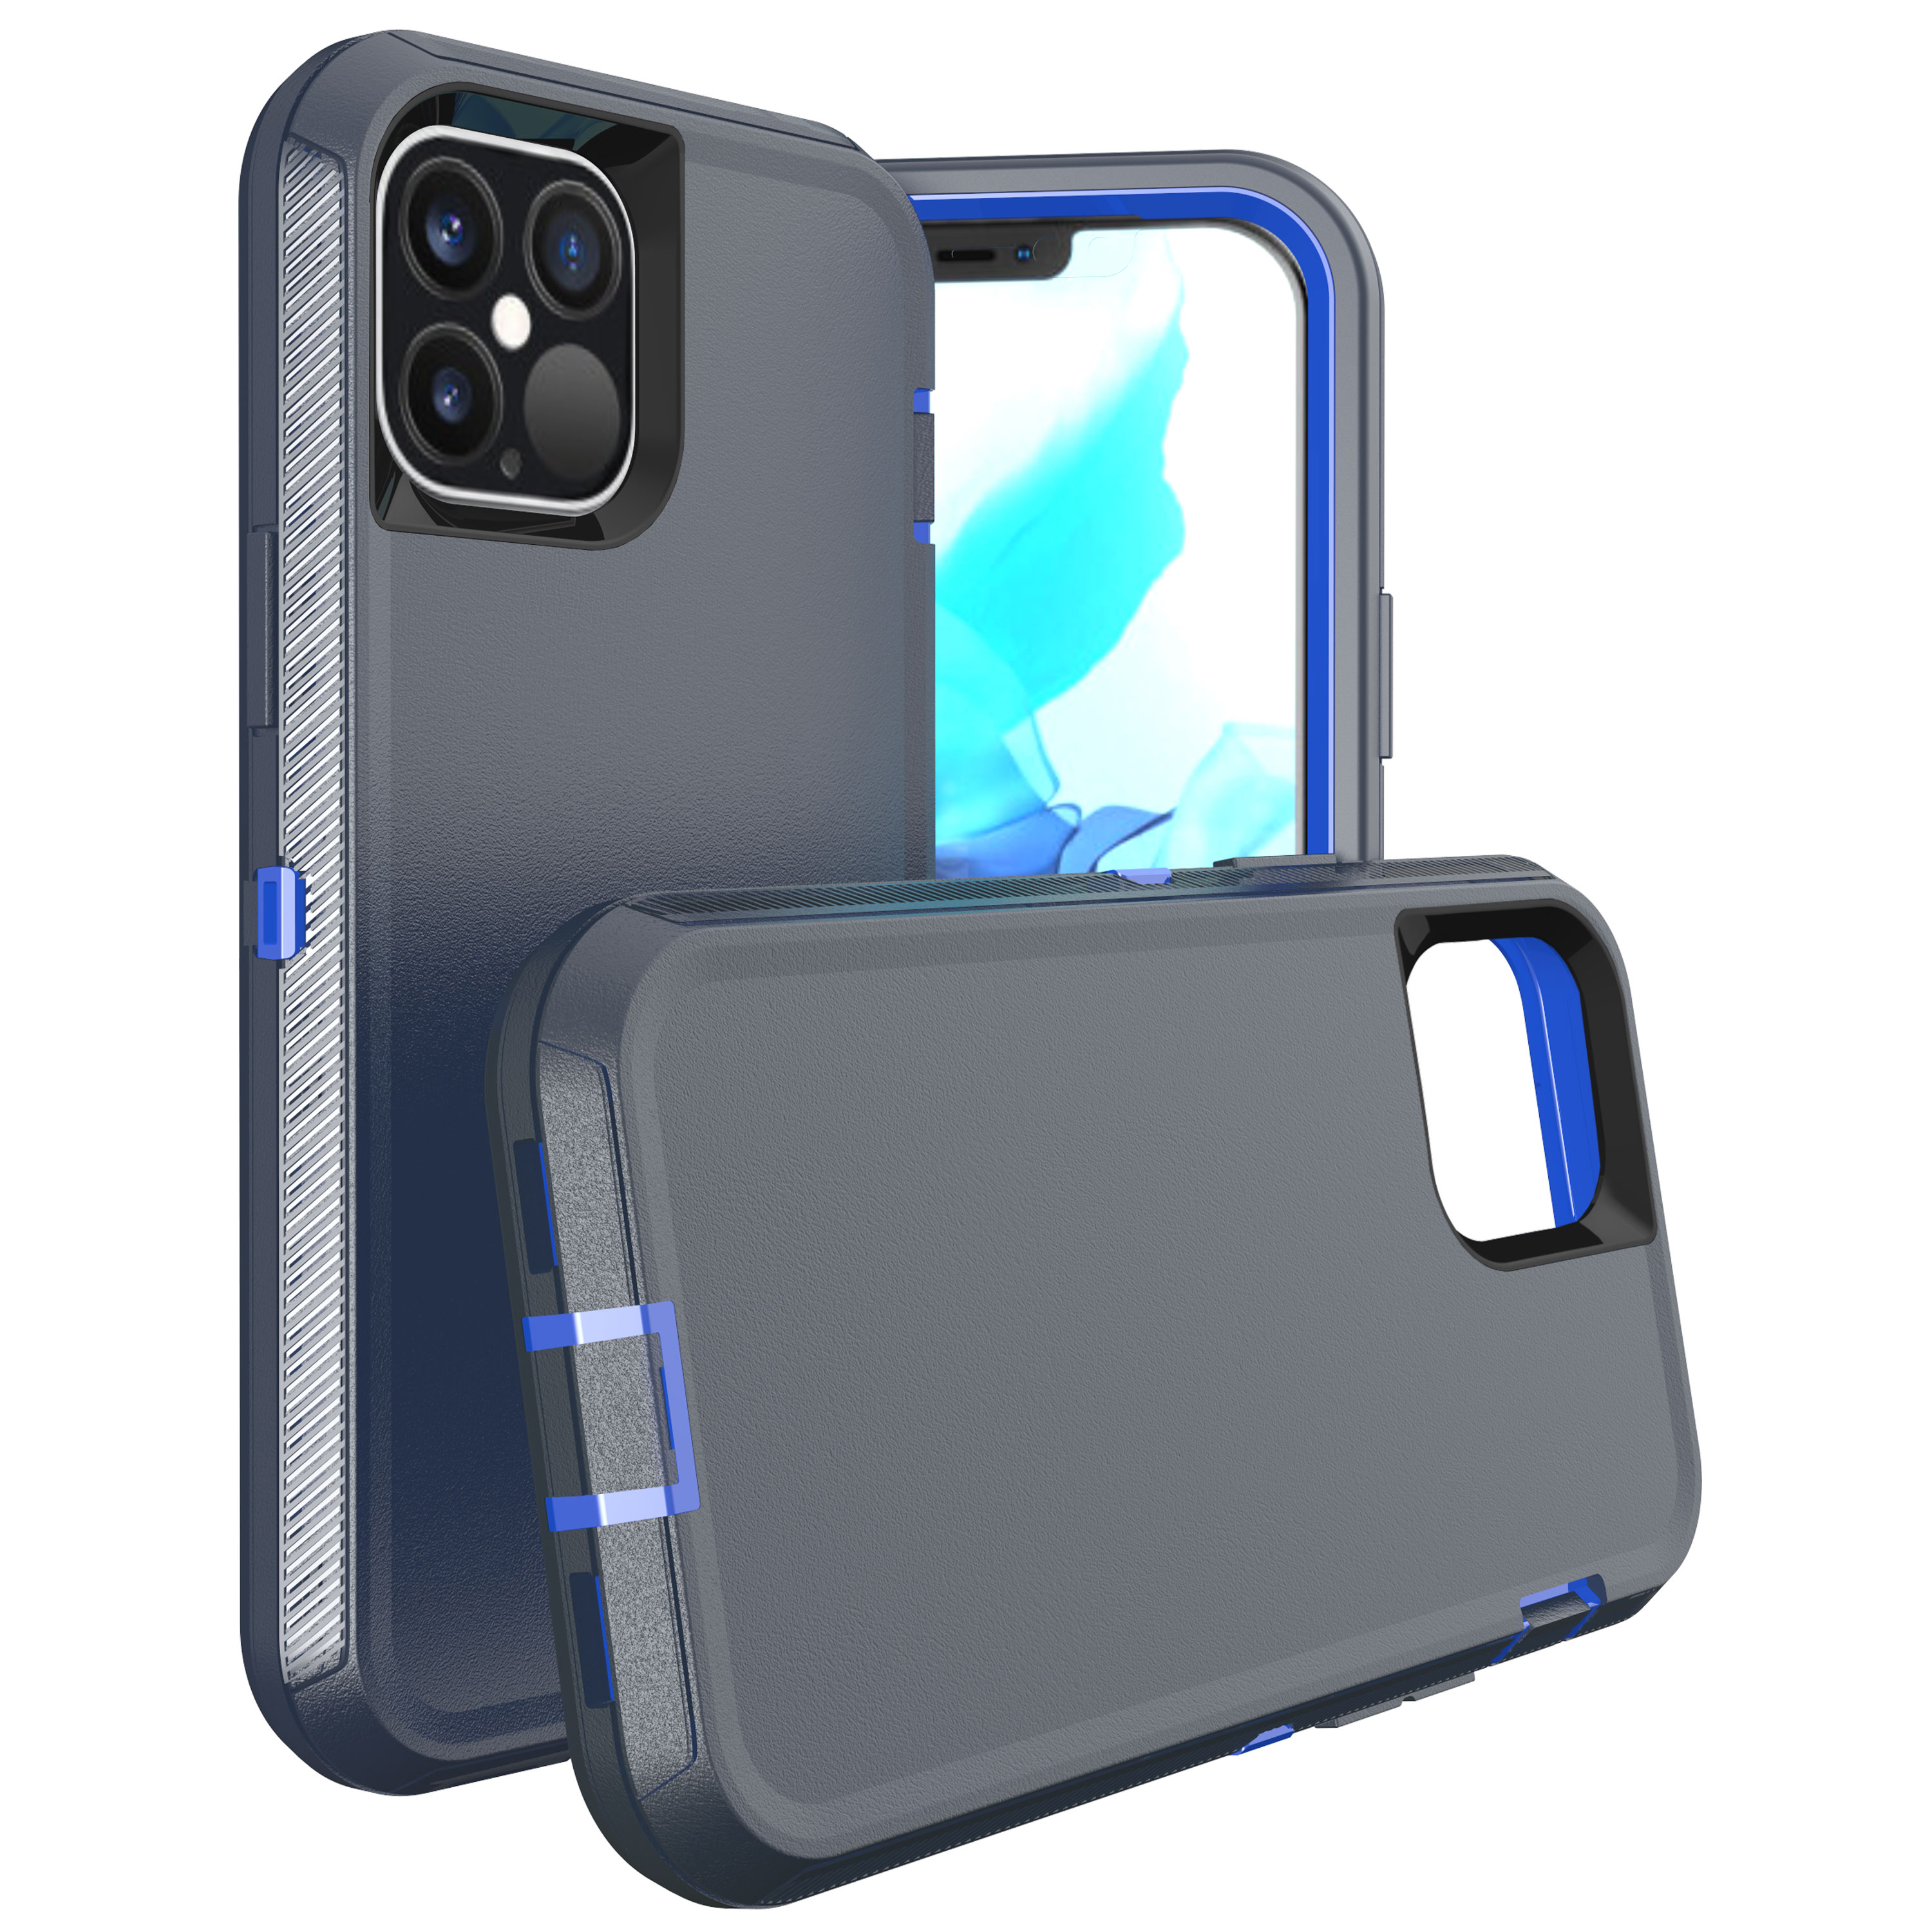 Armor Robot Case for IPHONE 12 Pro Max 6.7 (Navy Blue - Black)